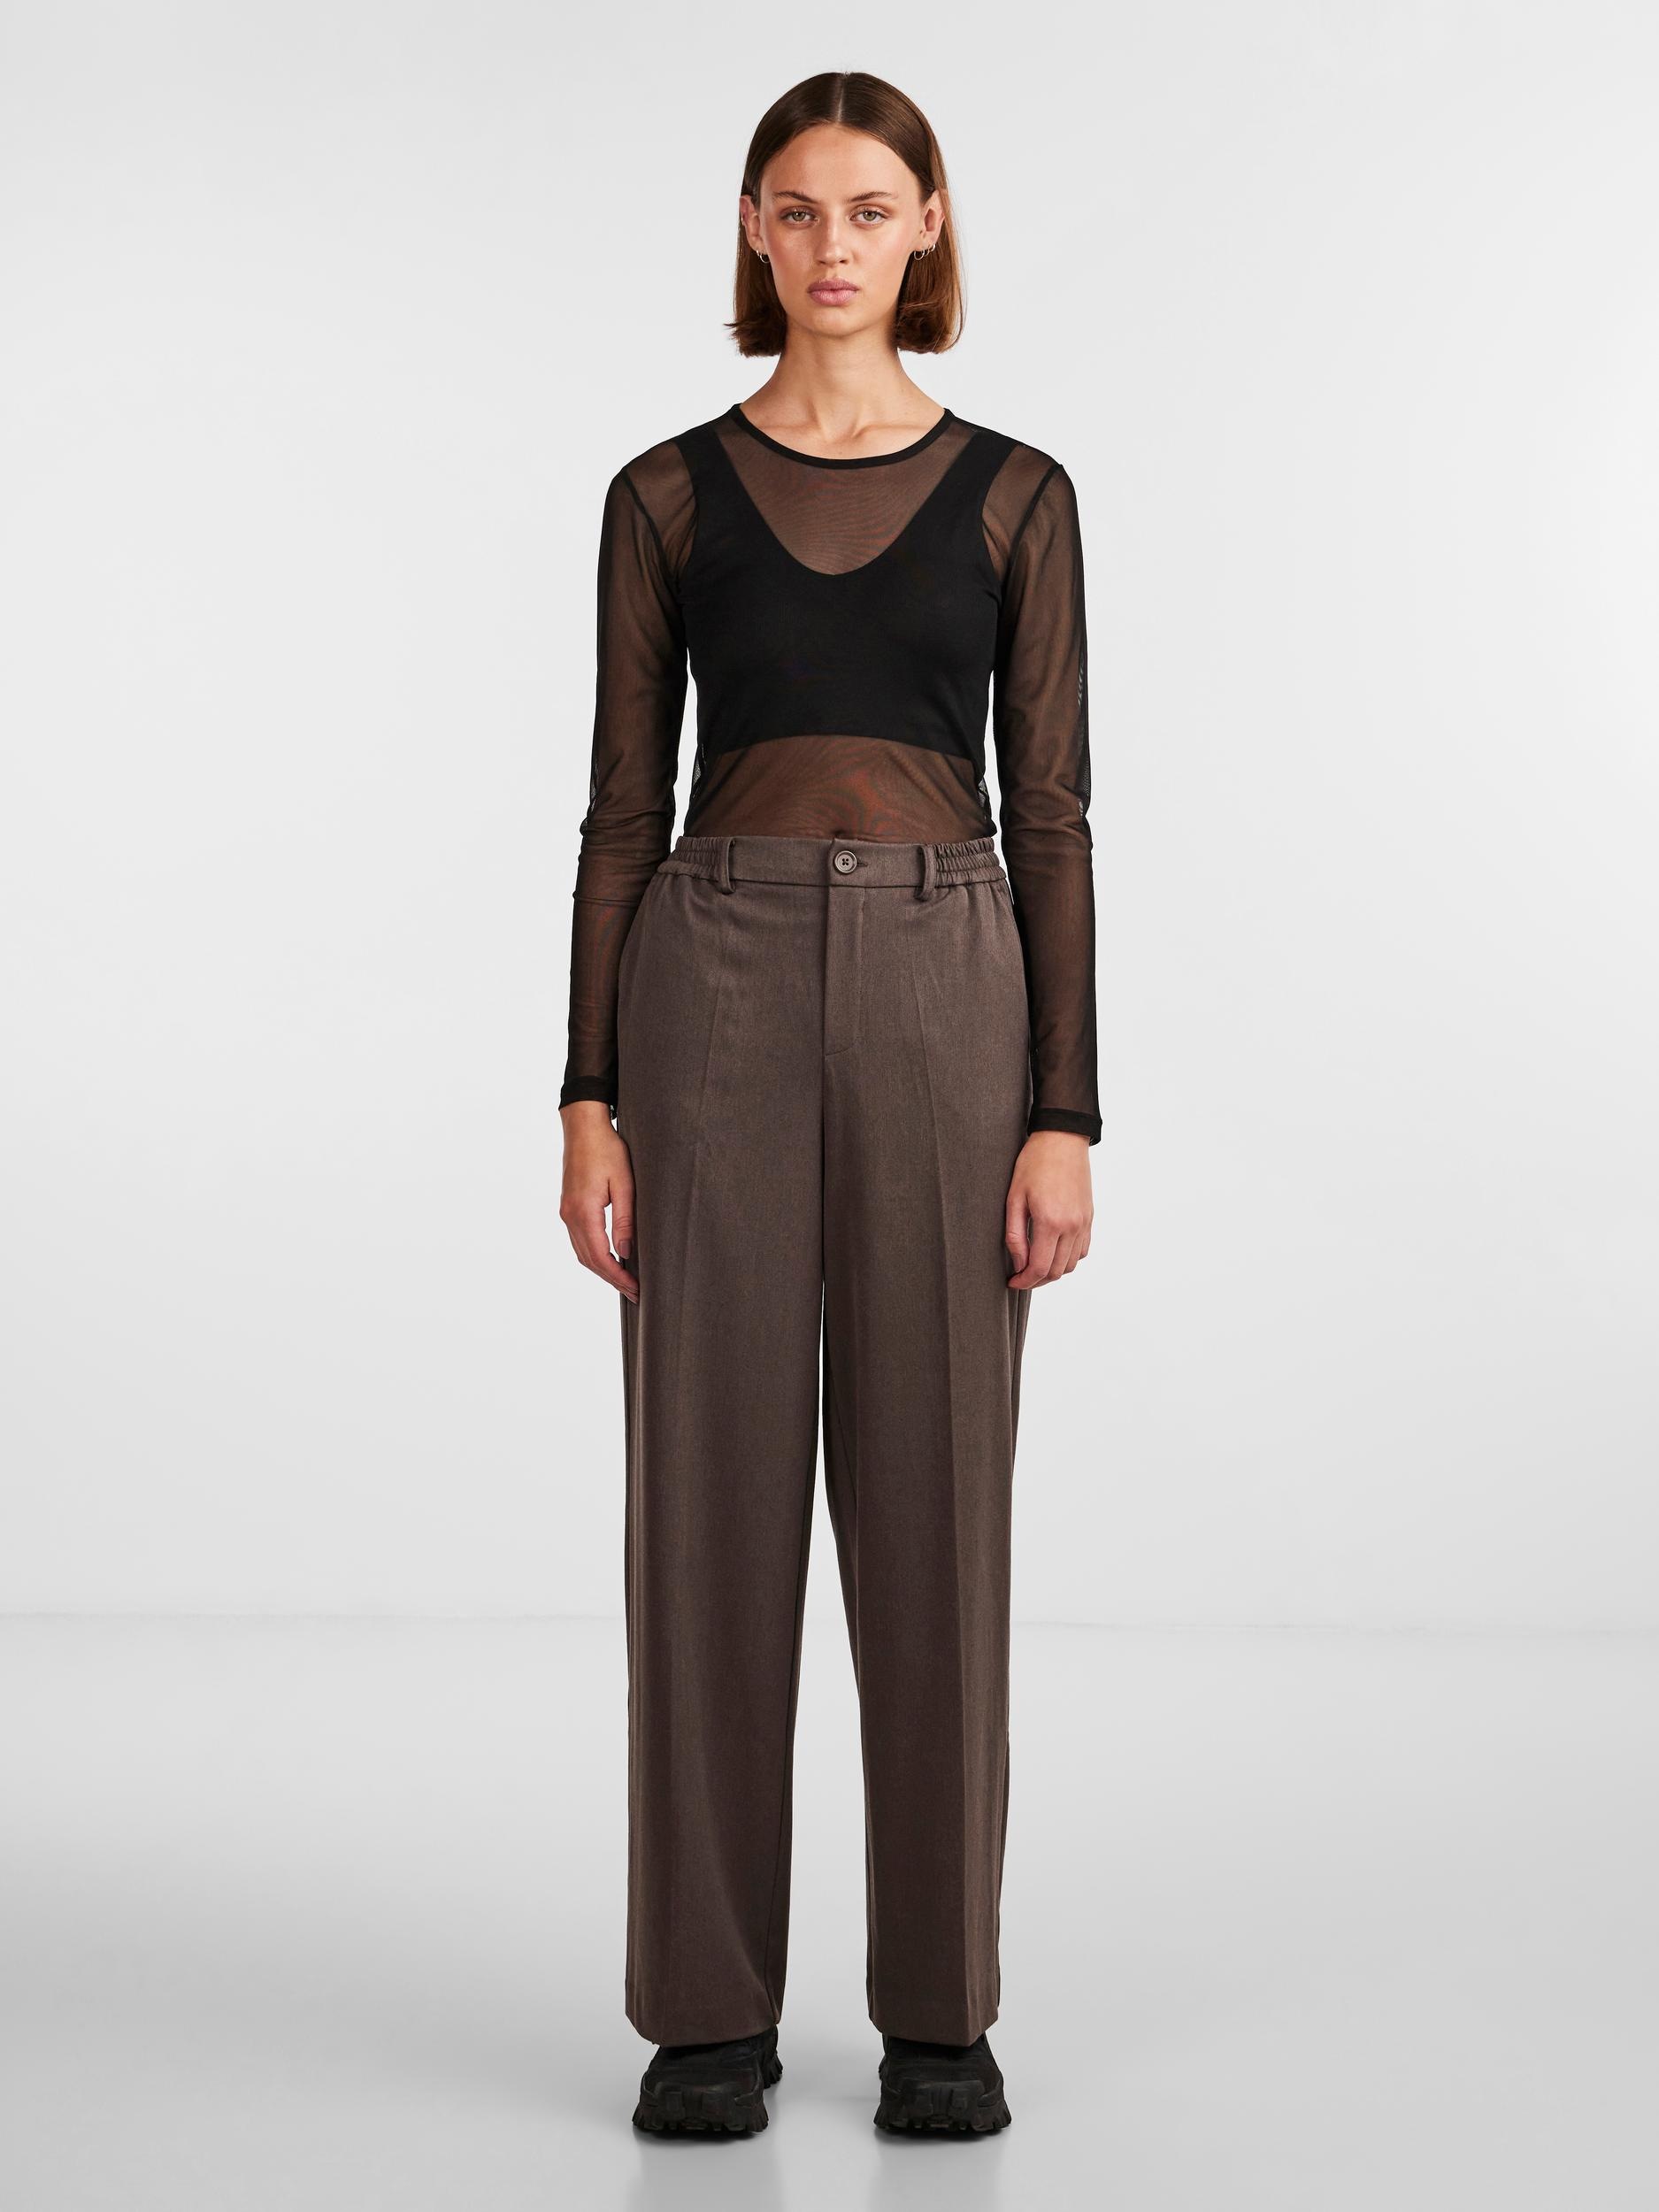 HW Anzughose WIDE PANT »PCCAMIL bei NOOS« pieces OTTOversand